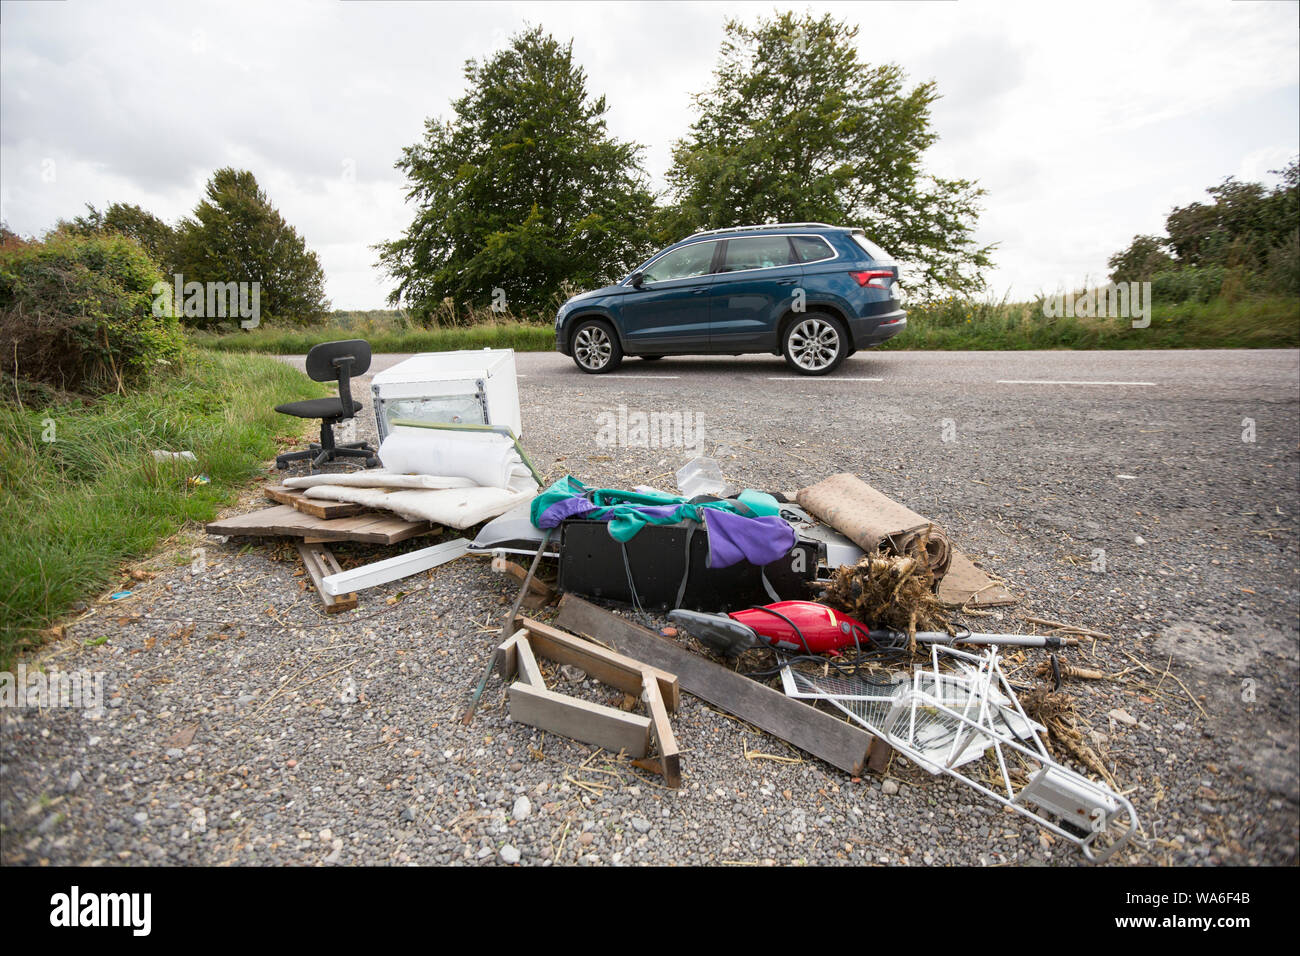 A vehicle passing rubbish dumped next to a country road in Dorset. Items include a flat screen television, a chair and rucksack. Dorset England UK GB Stock Photo